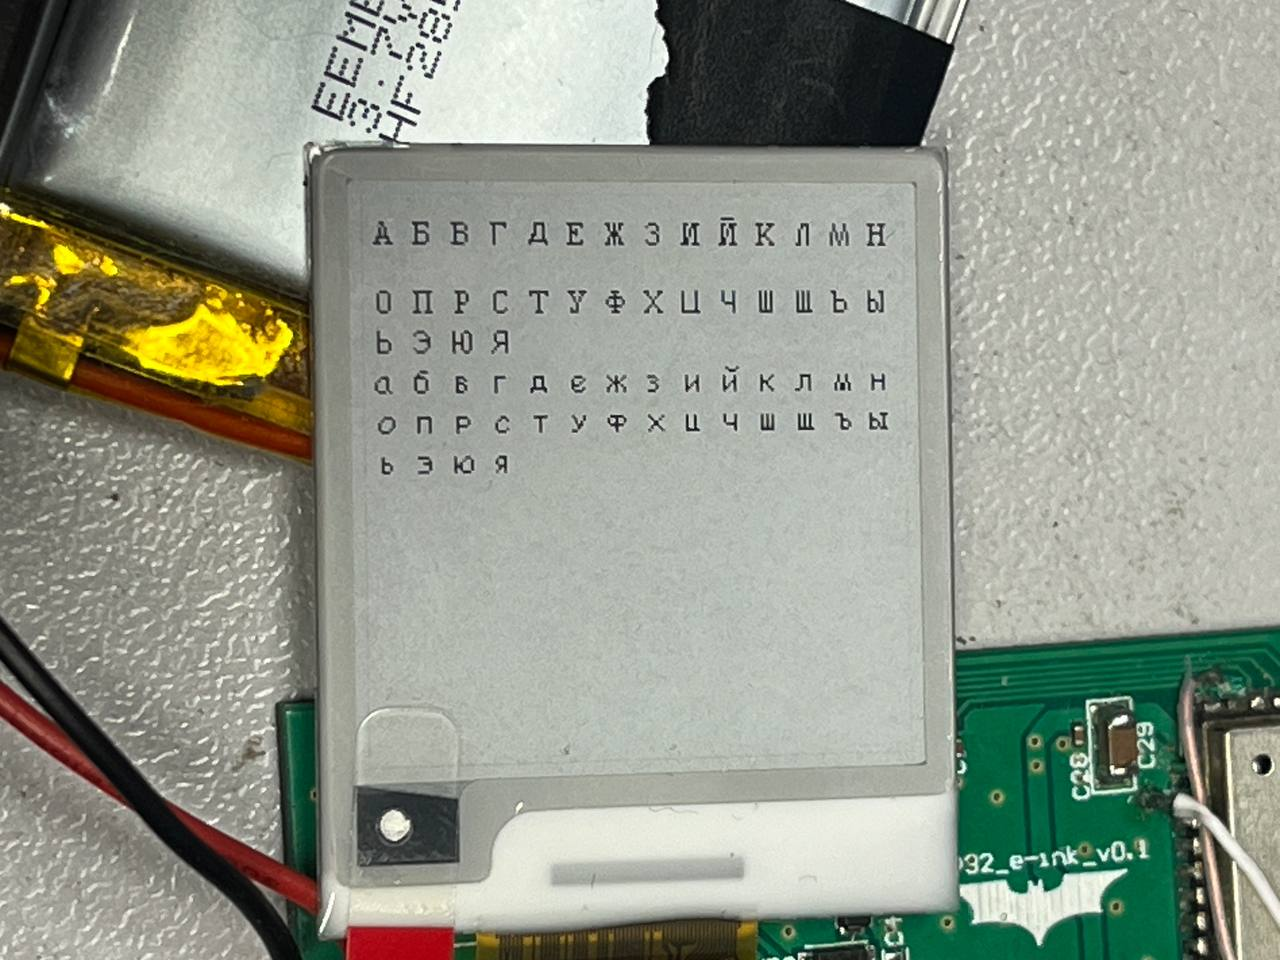 Development of the world's smallest book on an e-ink display - My, Timeweb, With your own hands, Electronics, e-Ink, Assembly, Гаджеты, Witcher, Technics, Display, Homemade, Video, Youtube, Longpost